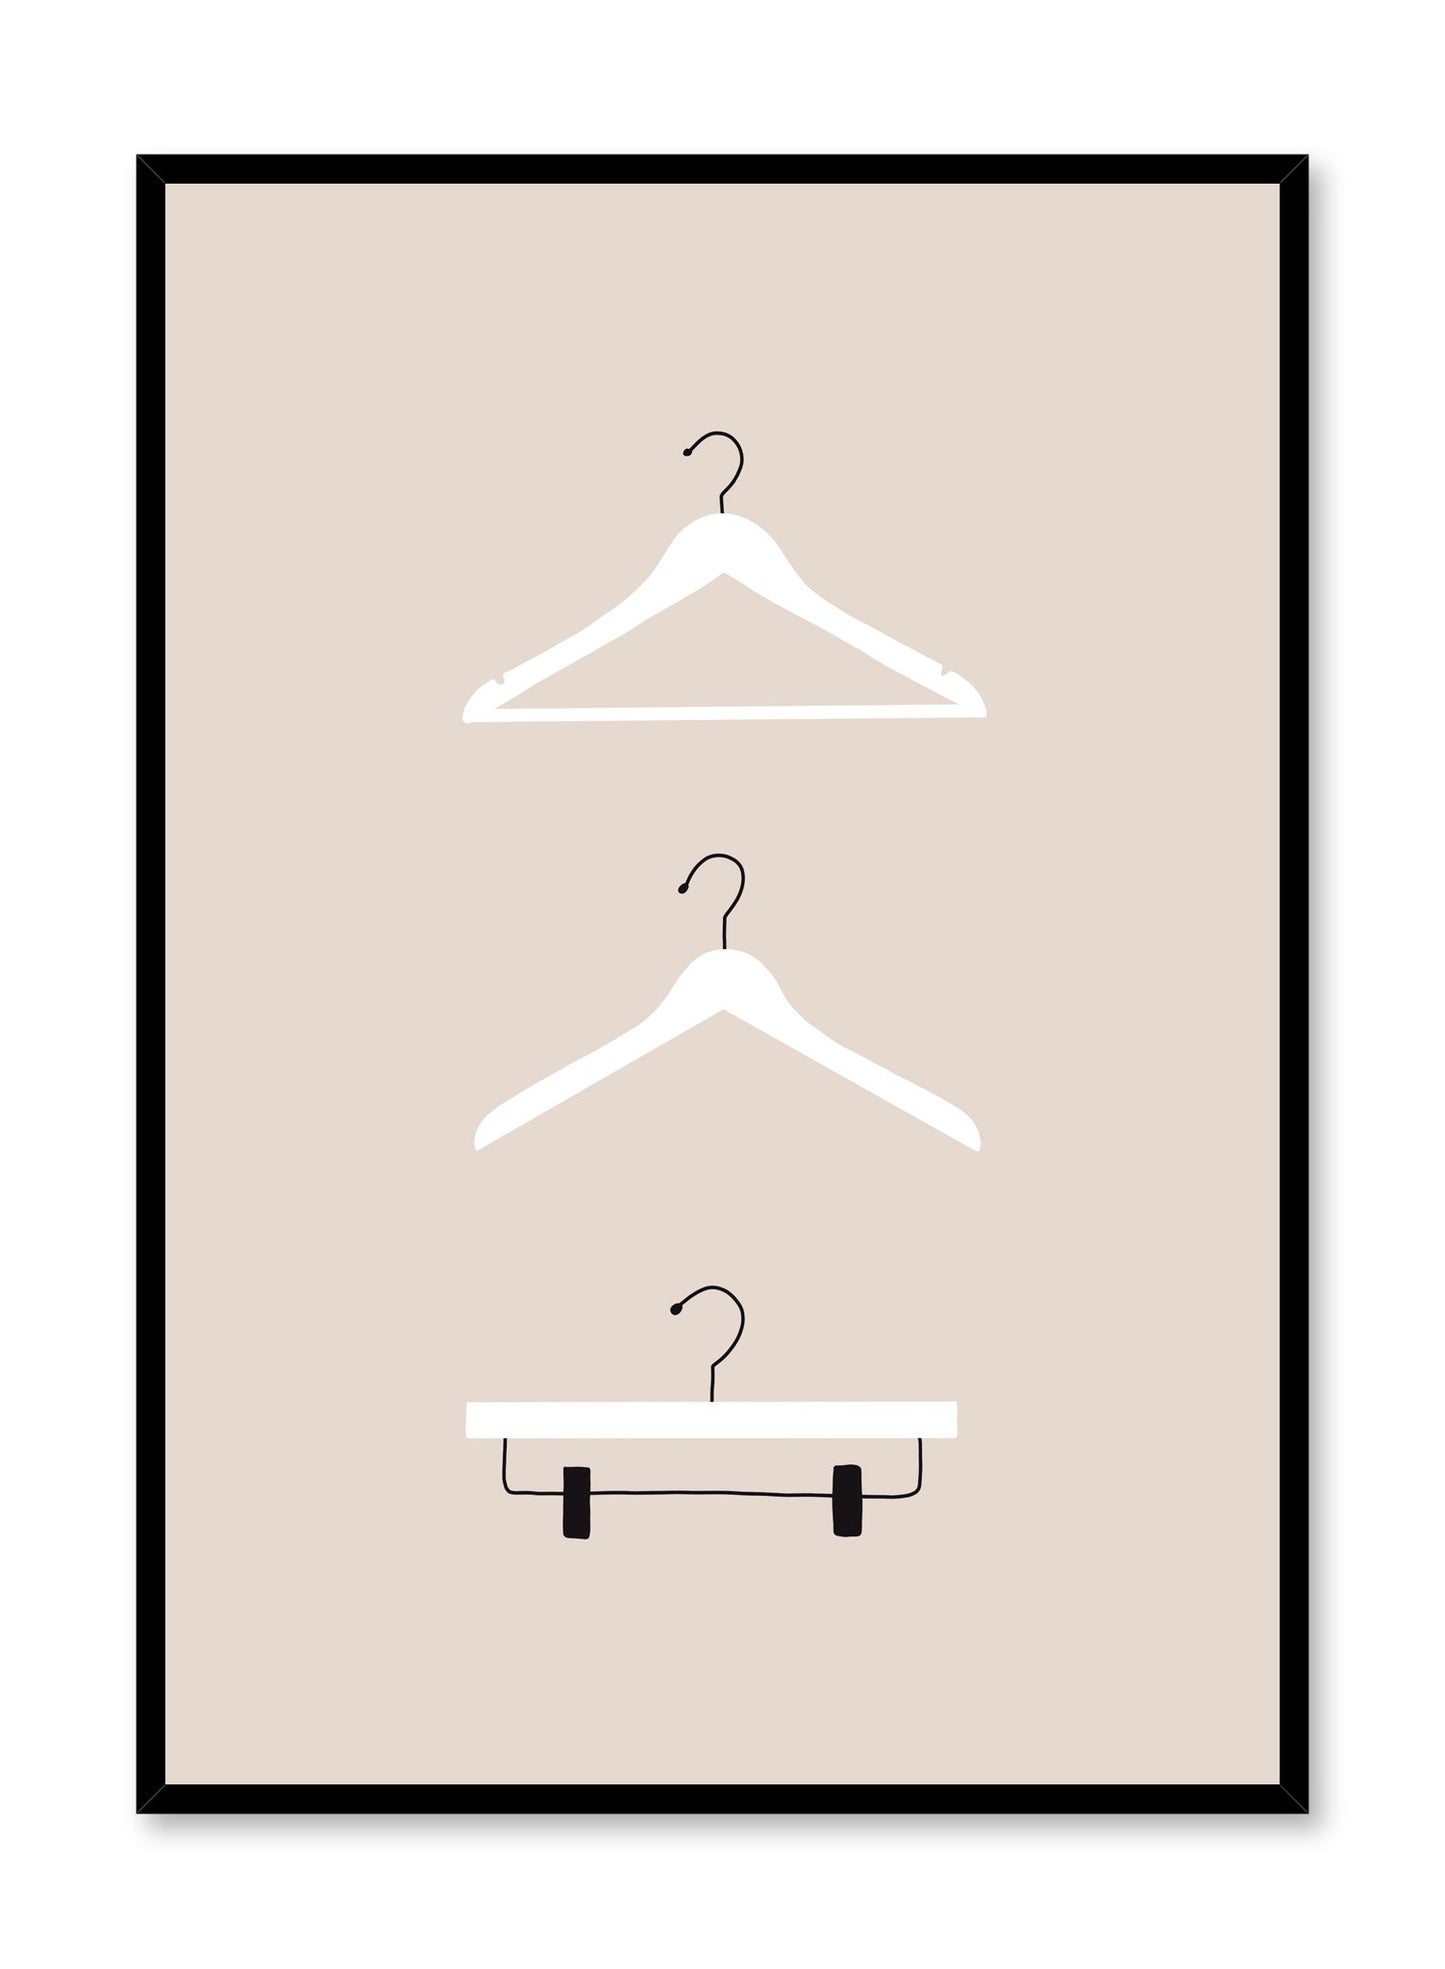 Fashion illustration poster by Opposite Wall with trio of clothes hangers